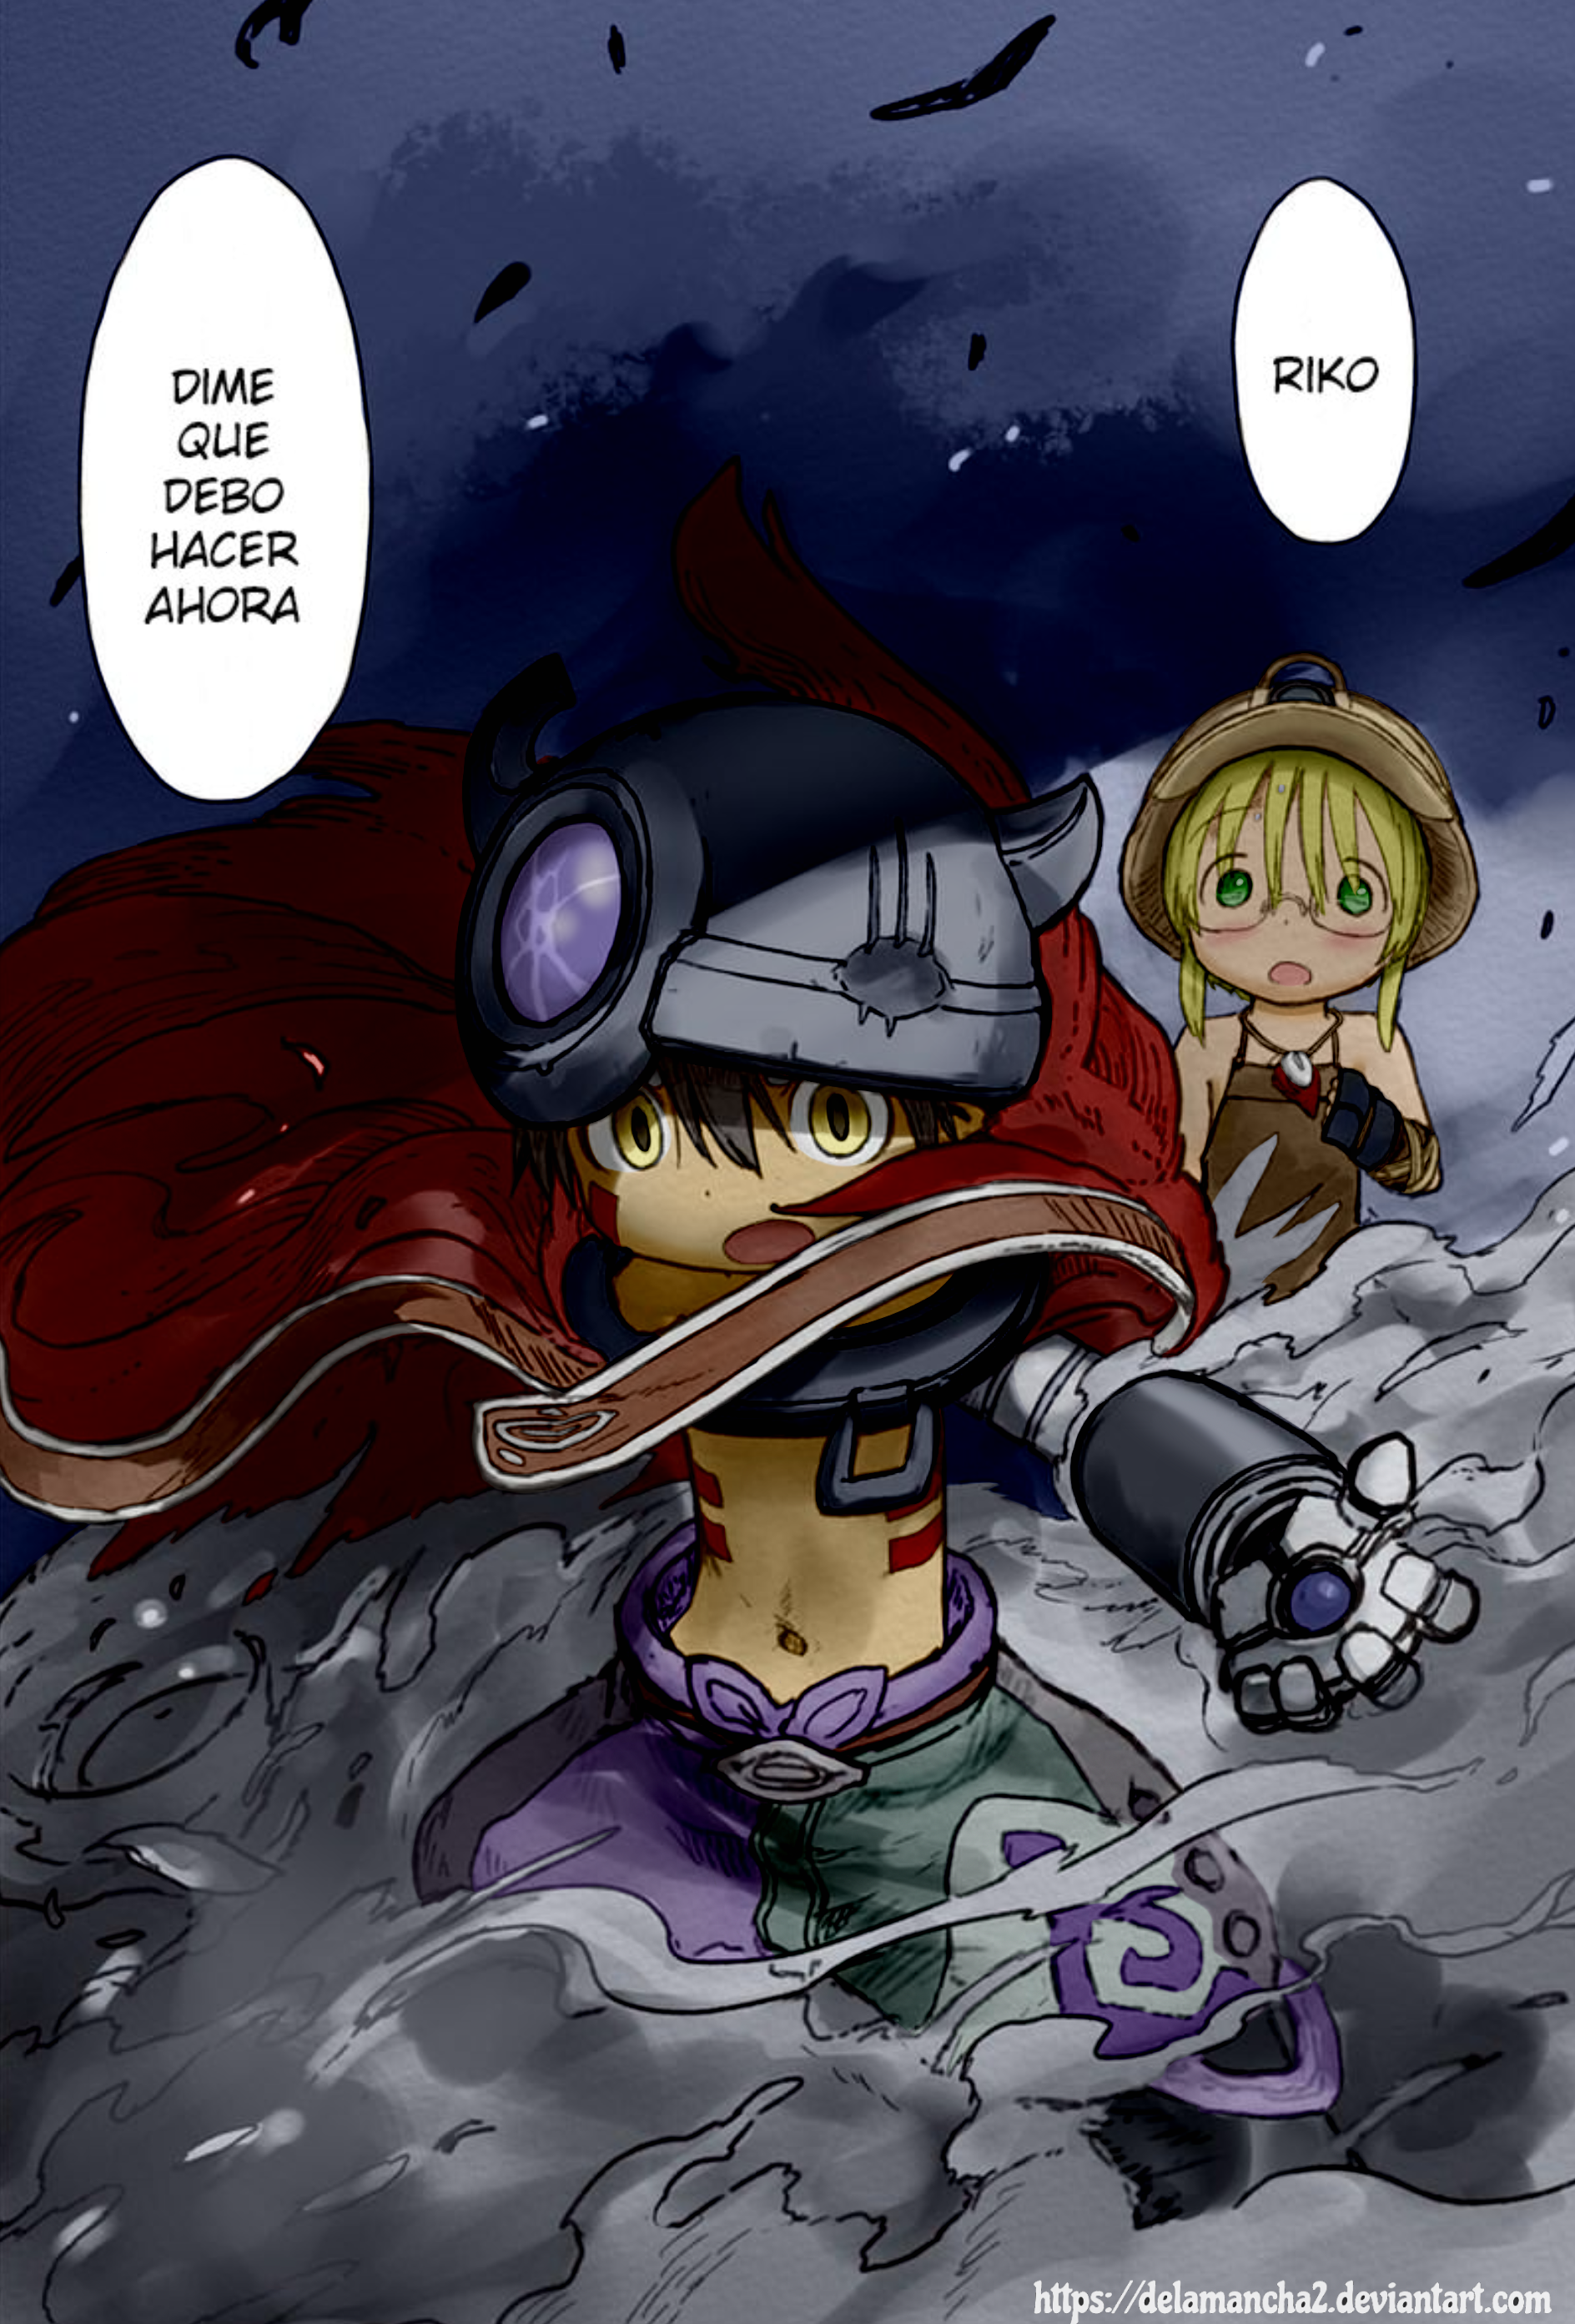 Made In Abyss Season 2 by AnormalADN on DeviantArt